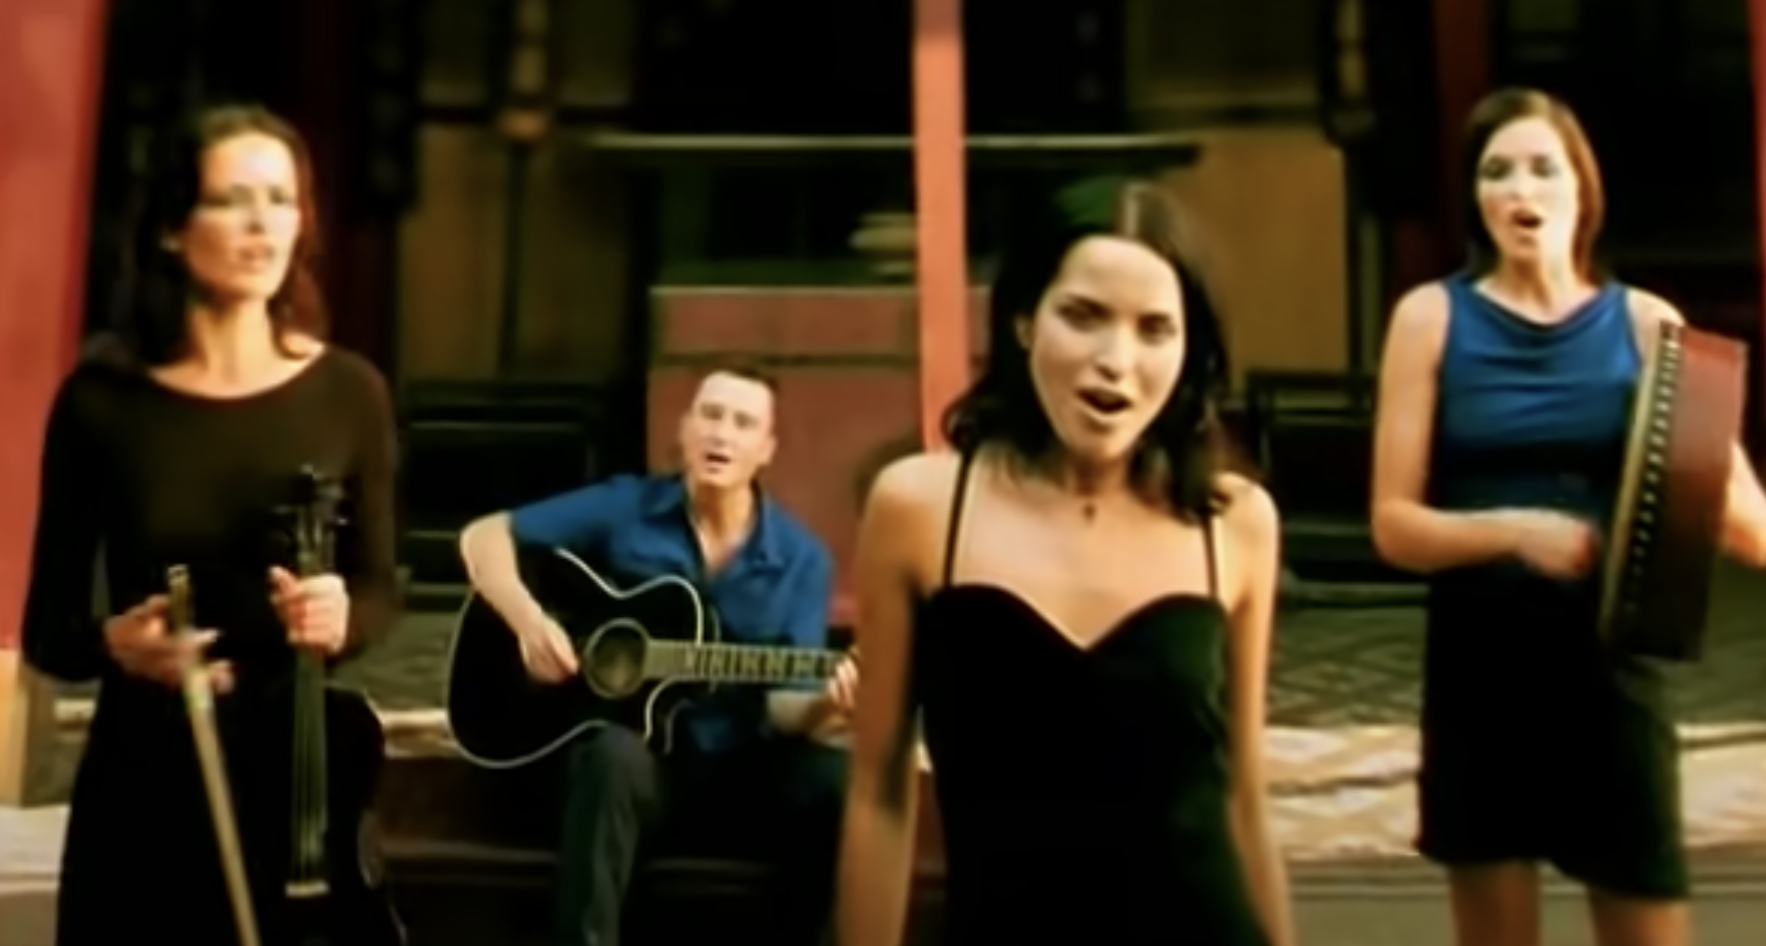 The Corrs performs &quot;Dreams&quot; with a guitar, violin, and drum